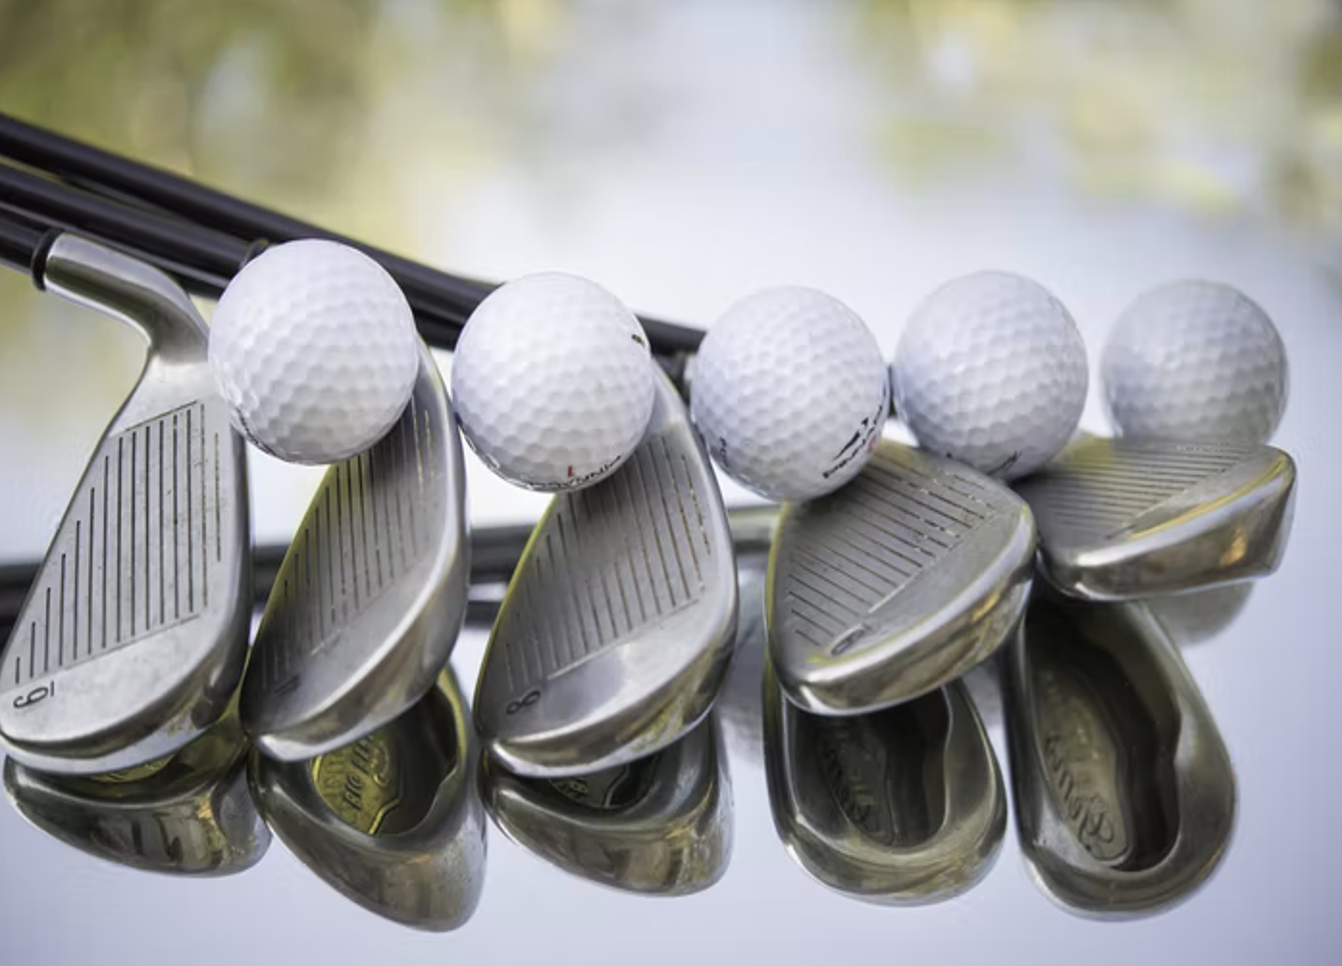 3 Expert Pointers to Keep in Mind When Maintaining and Storing Your Golf Equipment